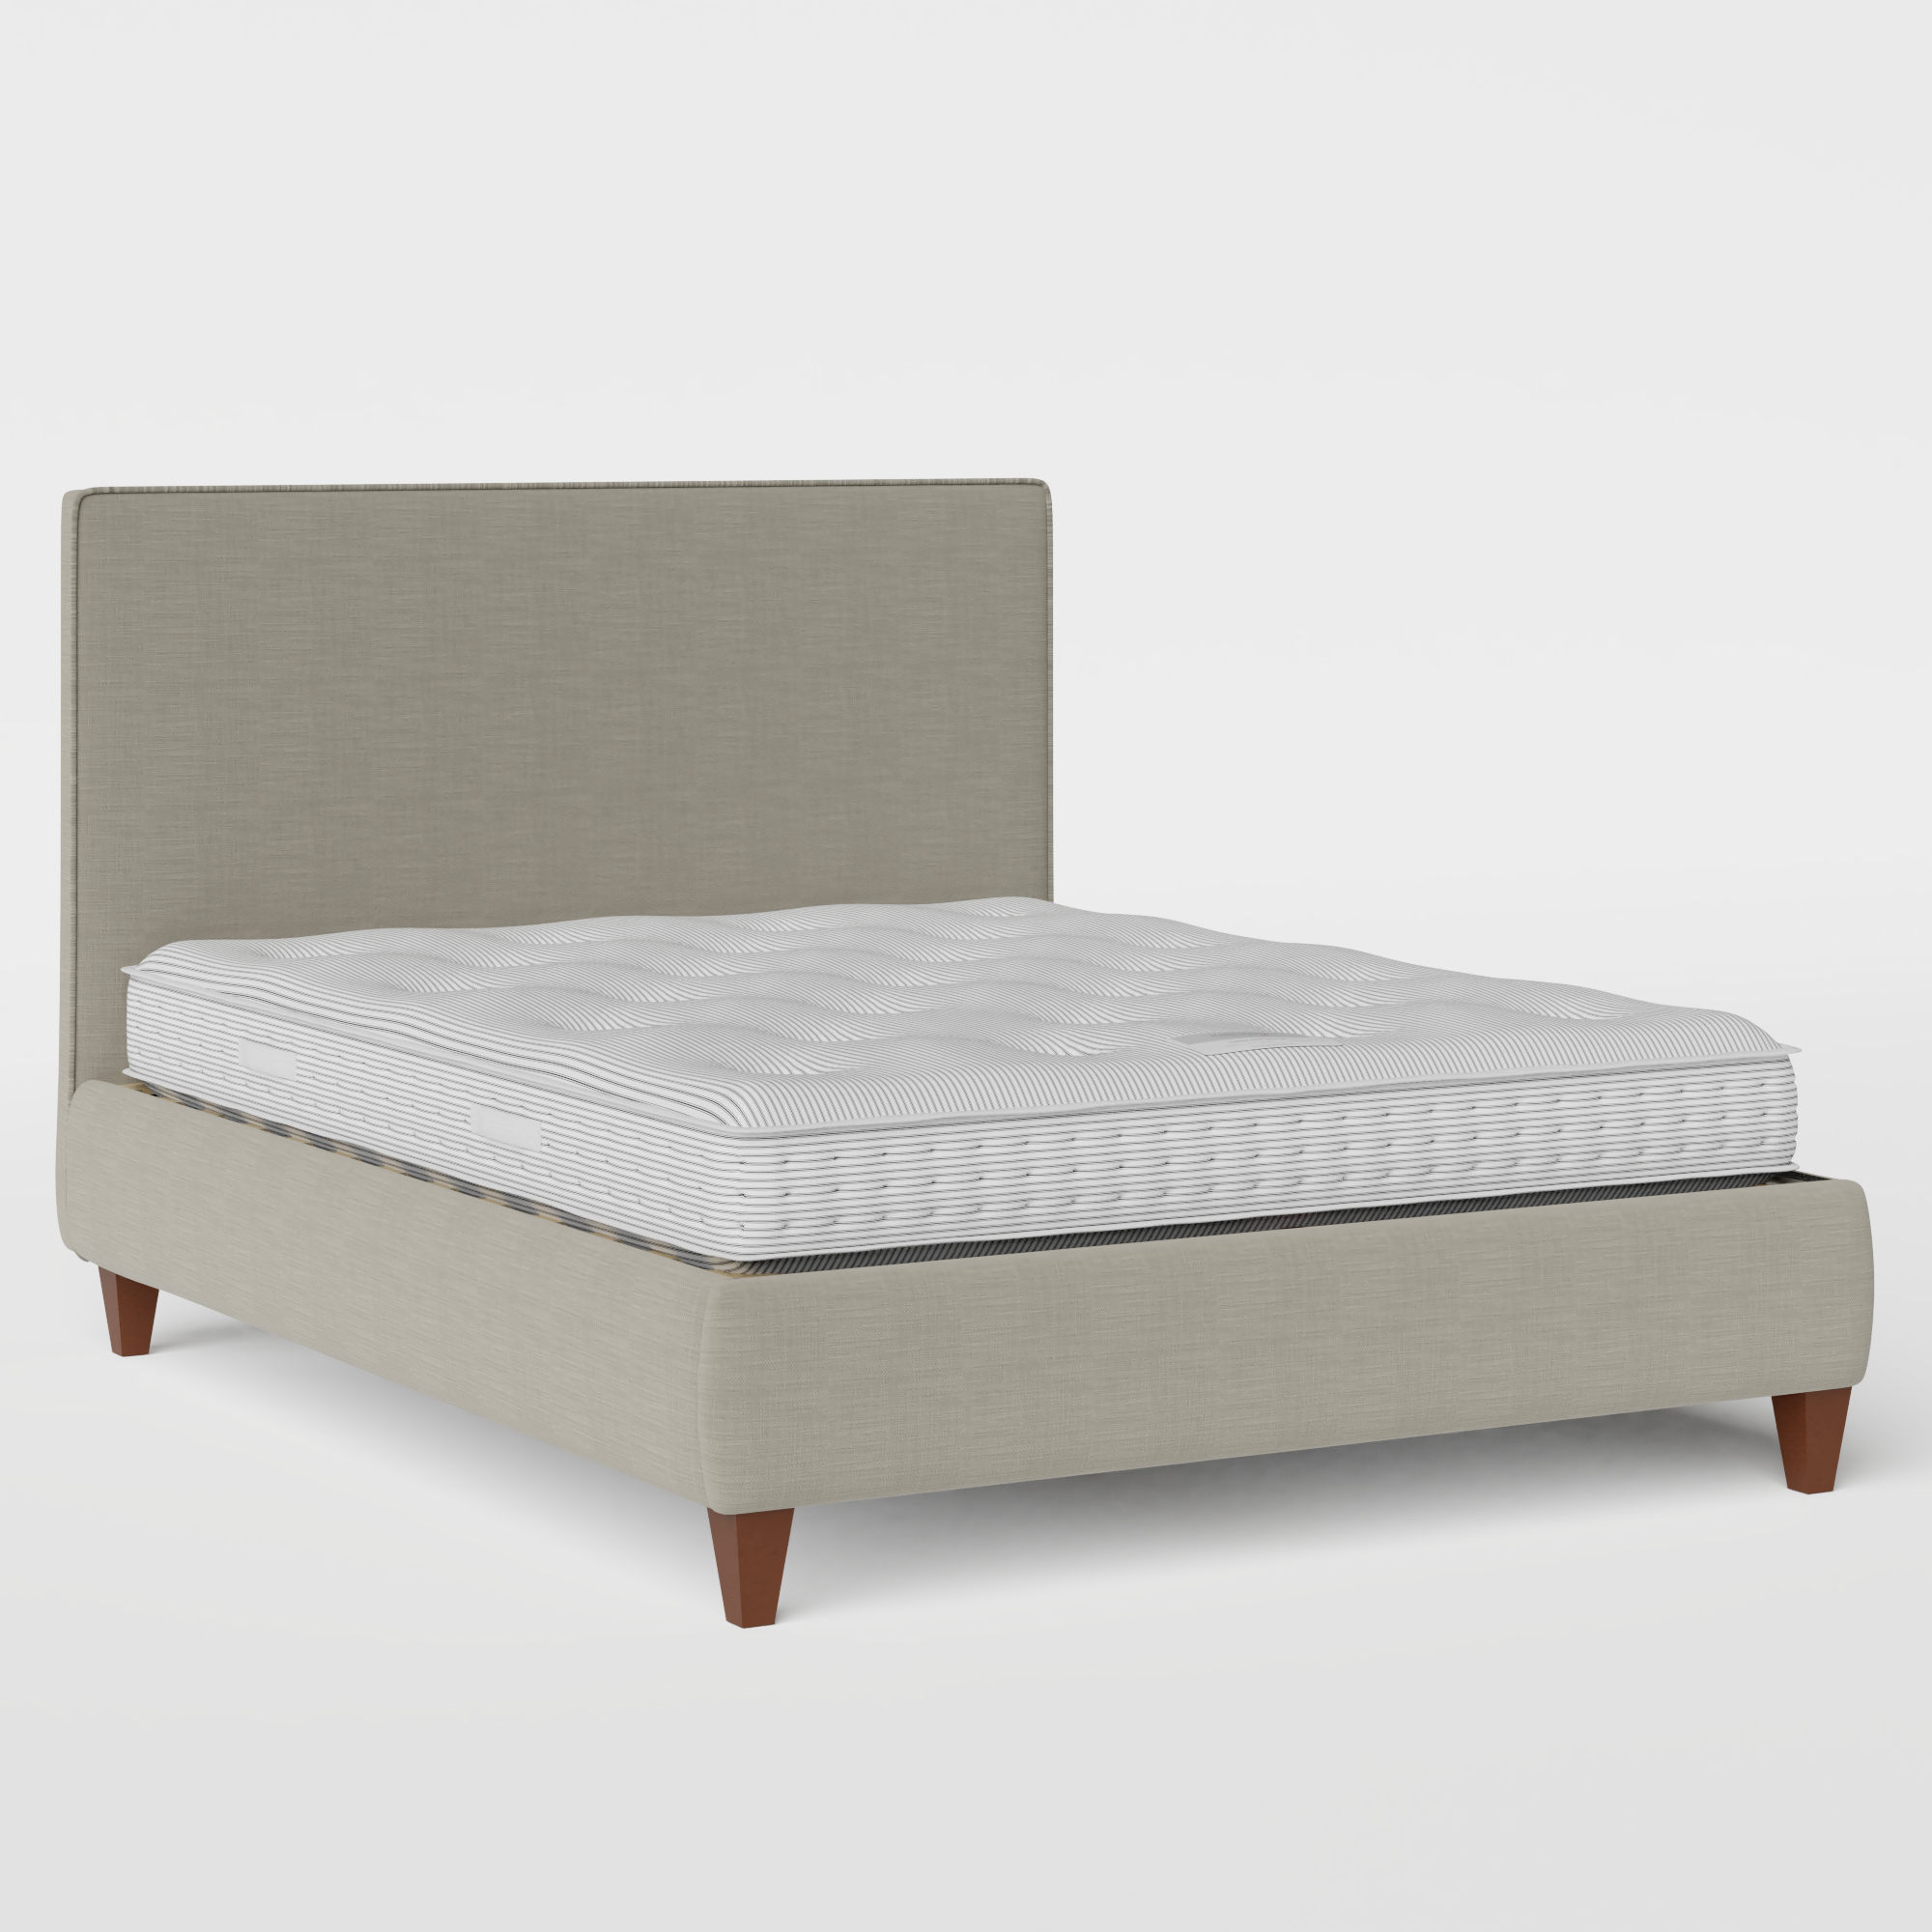 Yushan with Piping upholstered bed in grey fabric